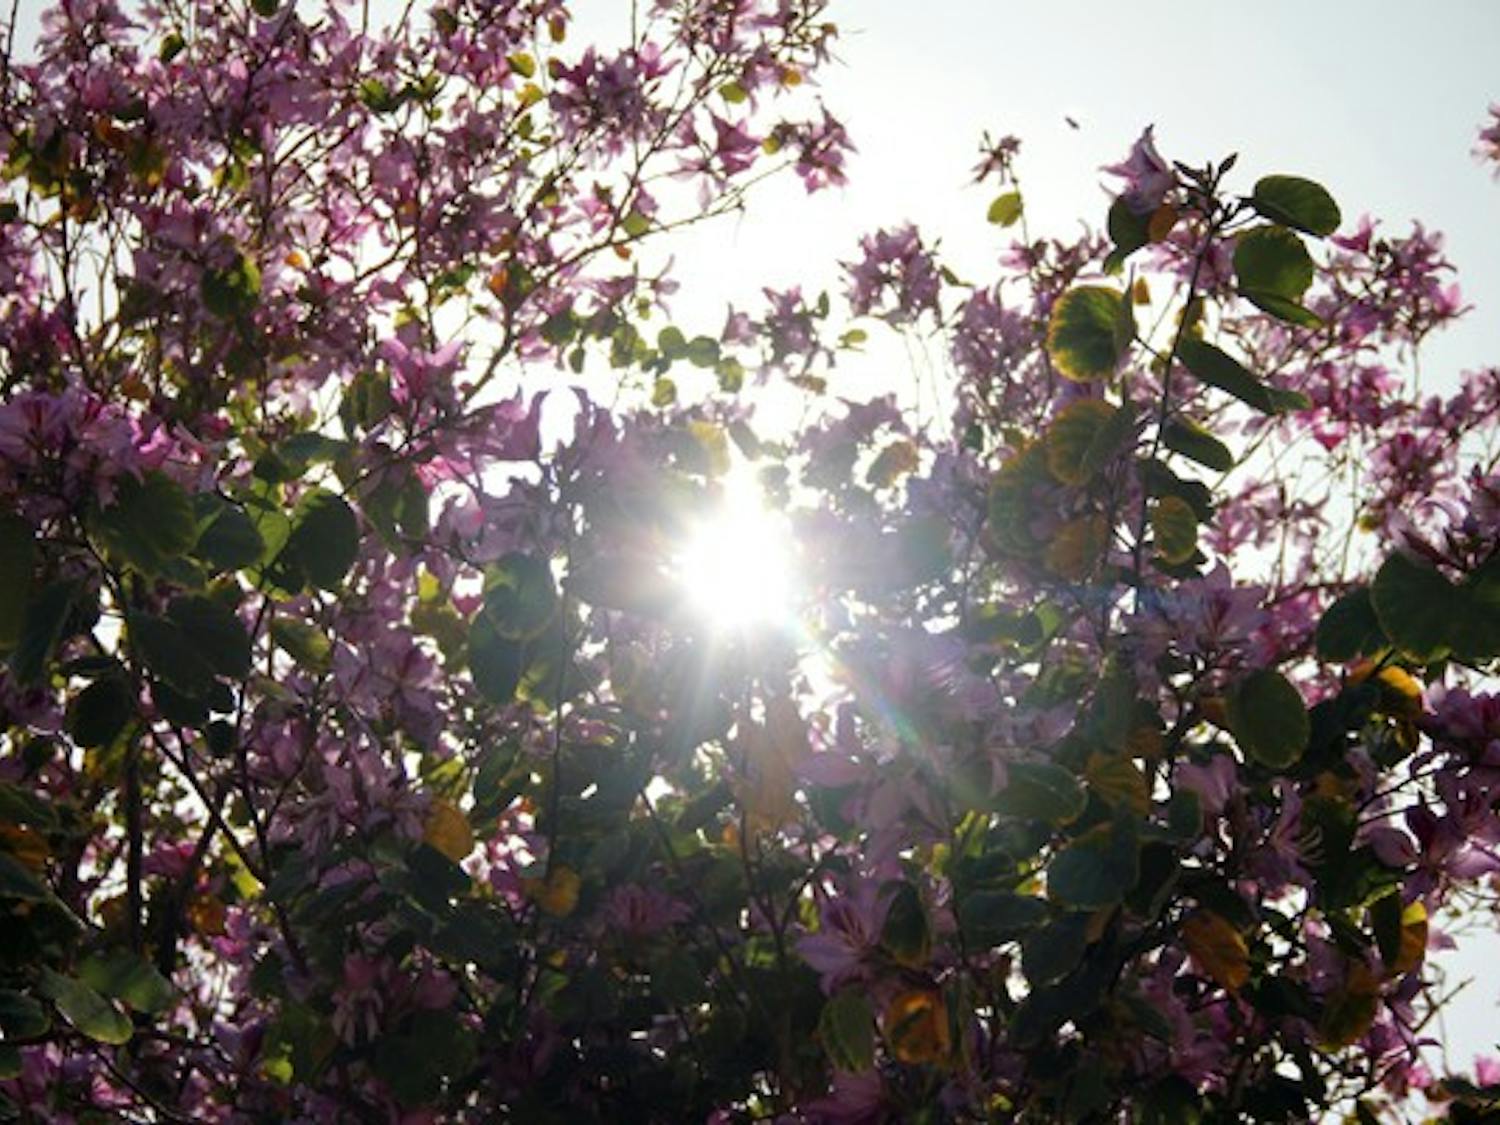 The sun shines through a flowering tree on the Tempe campus Tuesday afternoon. (Photo by Diana Lustig)